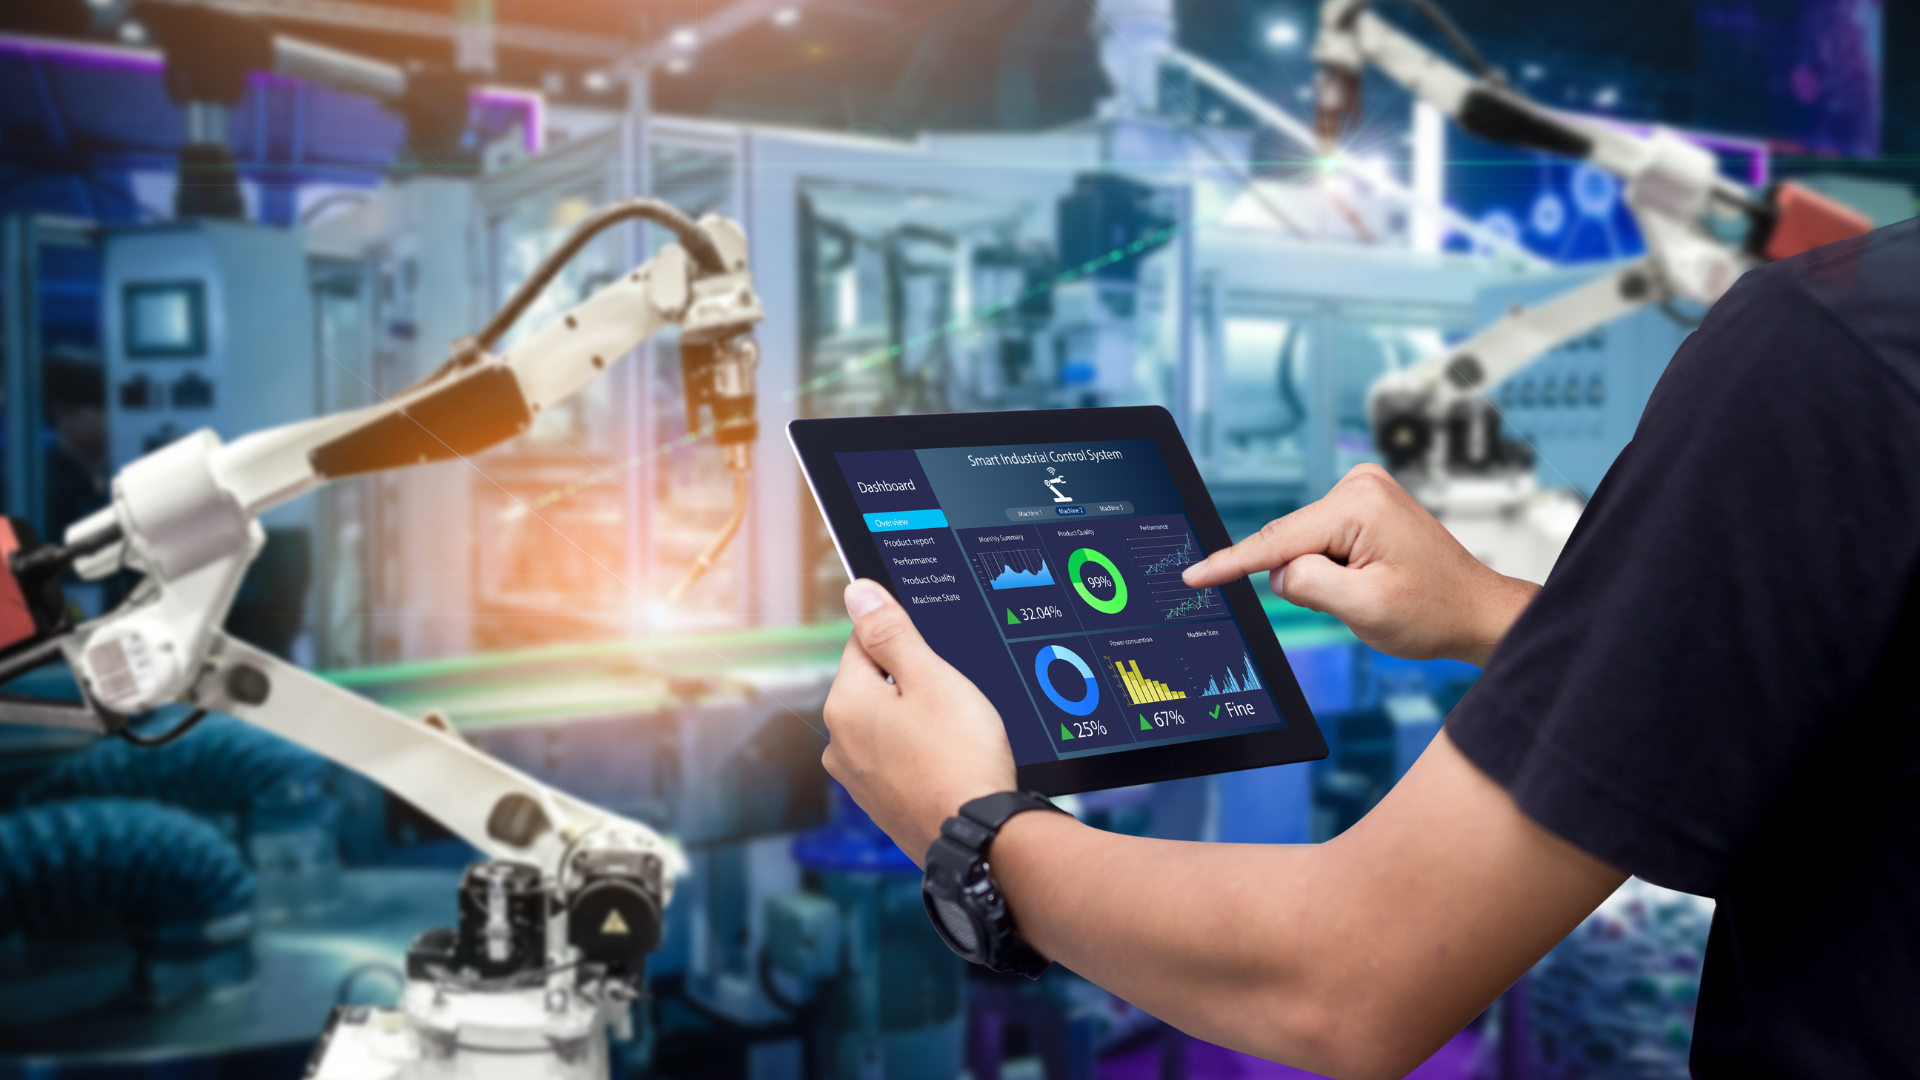 IoT Applications in Smart Manufacturing